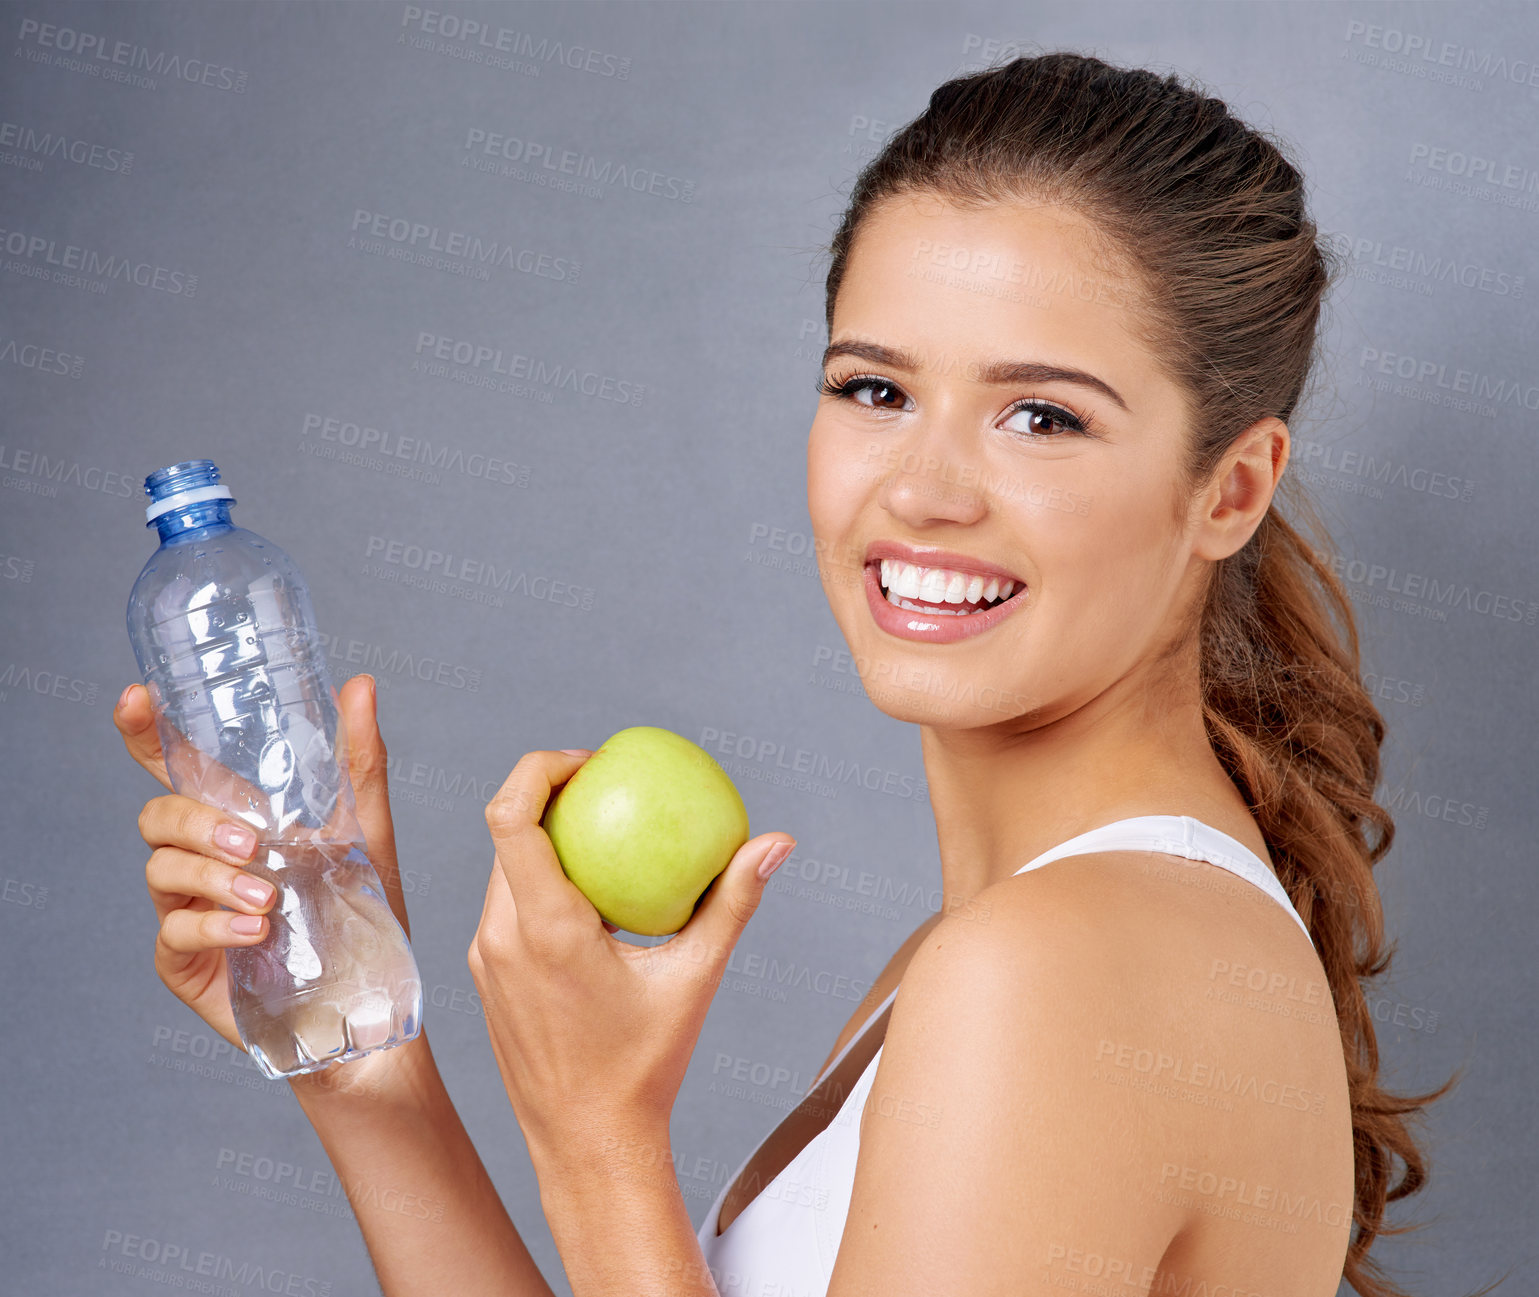 Buy stock photo Studio portrait of an attractive young woman holding an apple and a bottle of water against a grey background